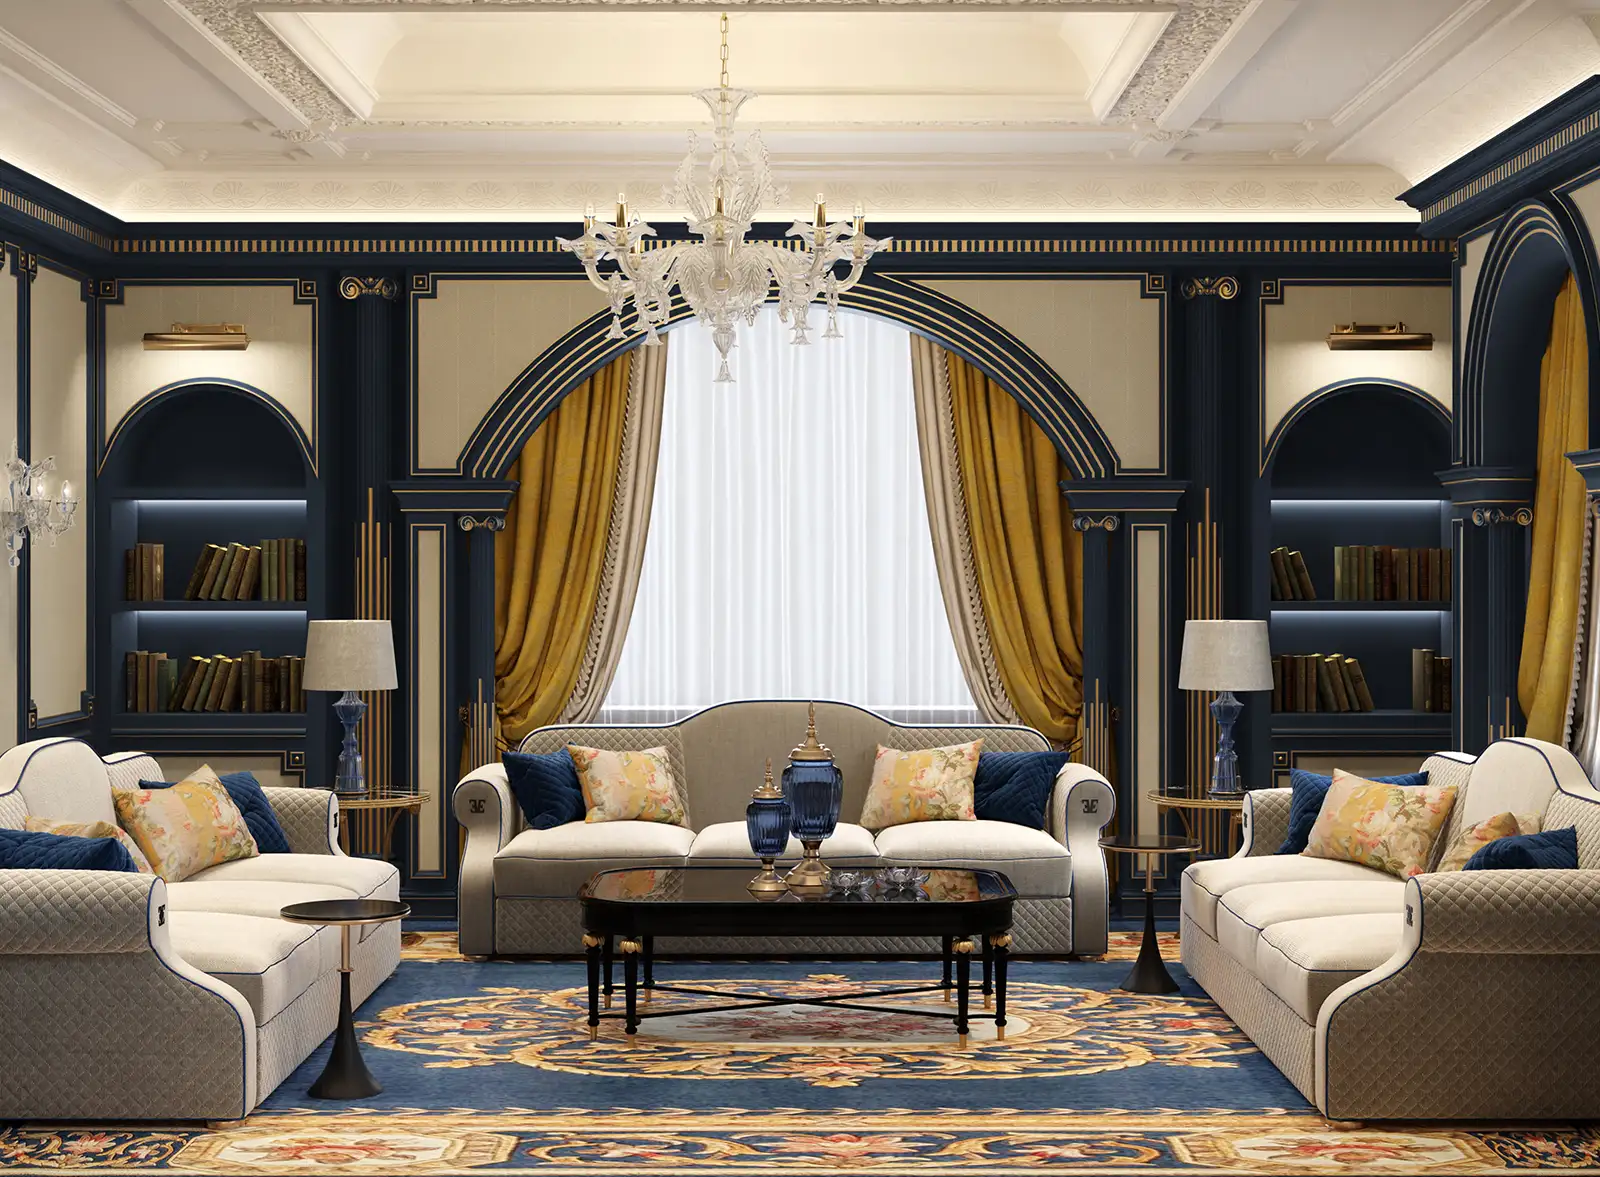 Refined living room interior design featuring deep blue built-in bookcases, gold drapery, luxurious patterned area rug, white plush sofas, and an intricate crystal chandelier, creating a space of sophistication and traditional elegance.